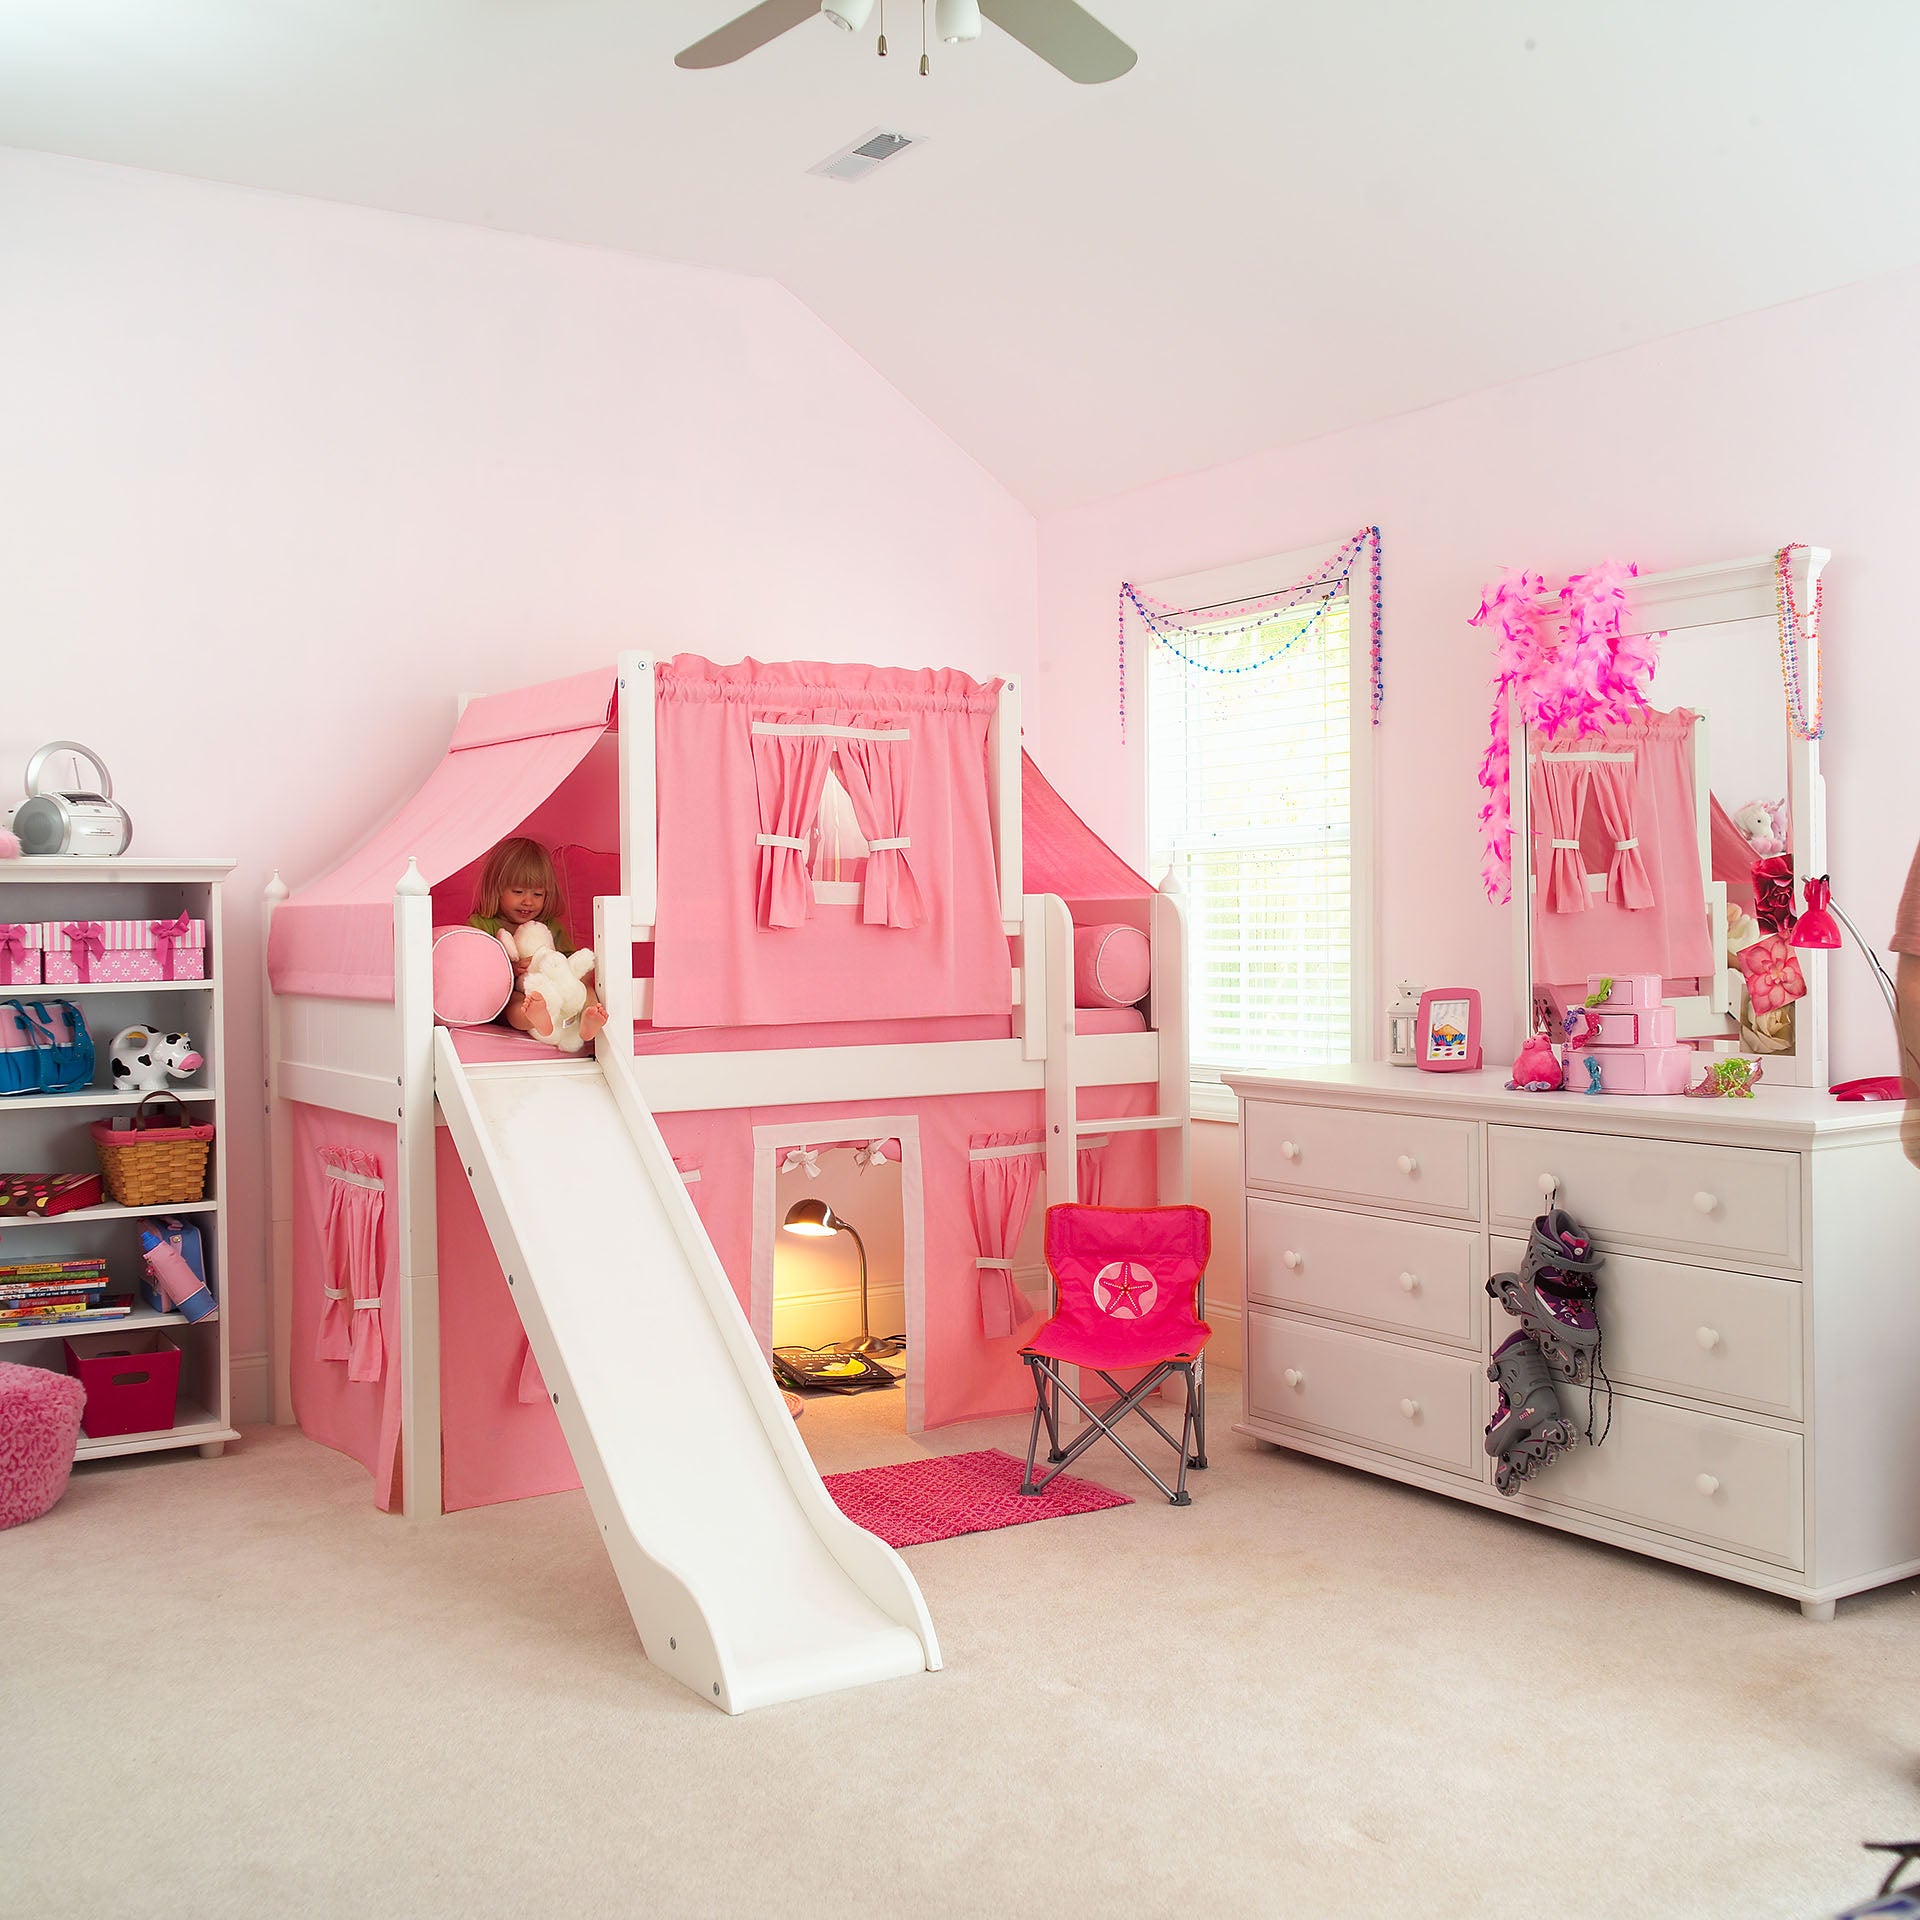 Maxtrix twin size panel style low loft with straight ladder, slide, and top & lower pink tents, shown in white. Also shown: double dresser with mirror and bookcase.